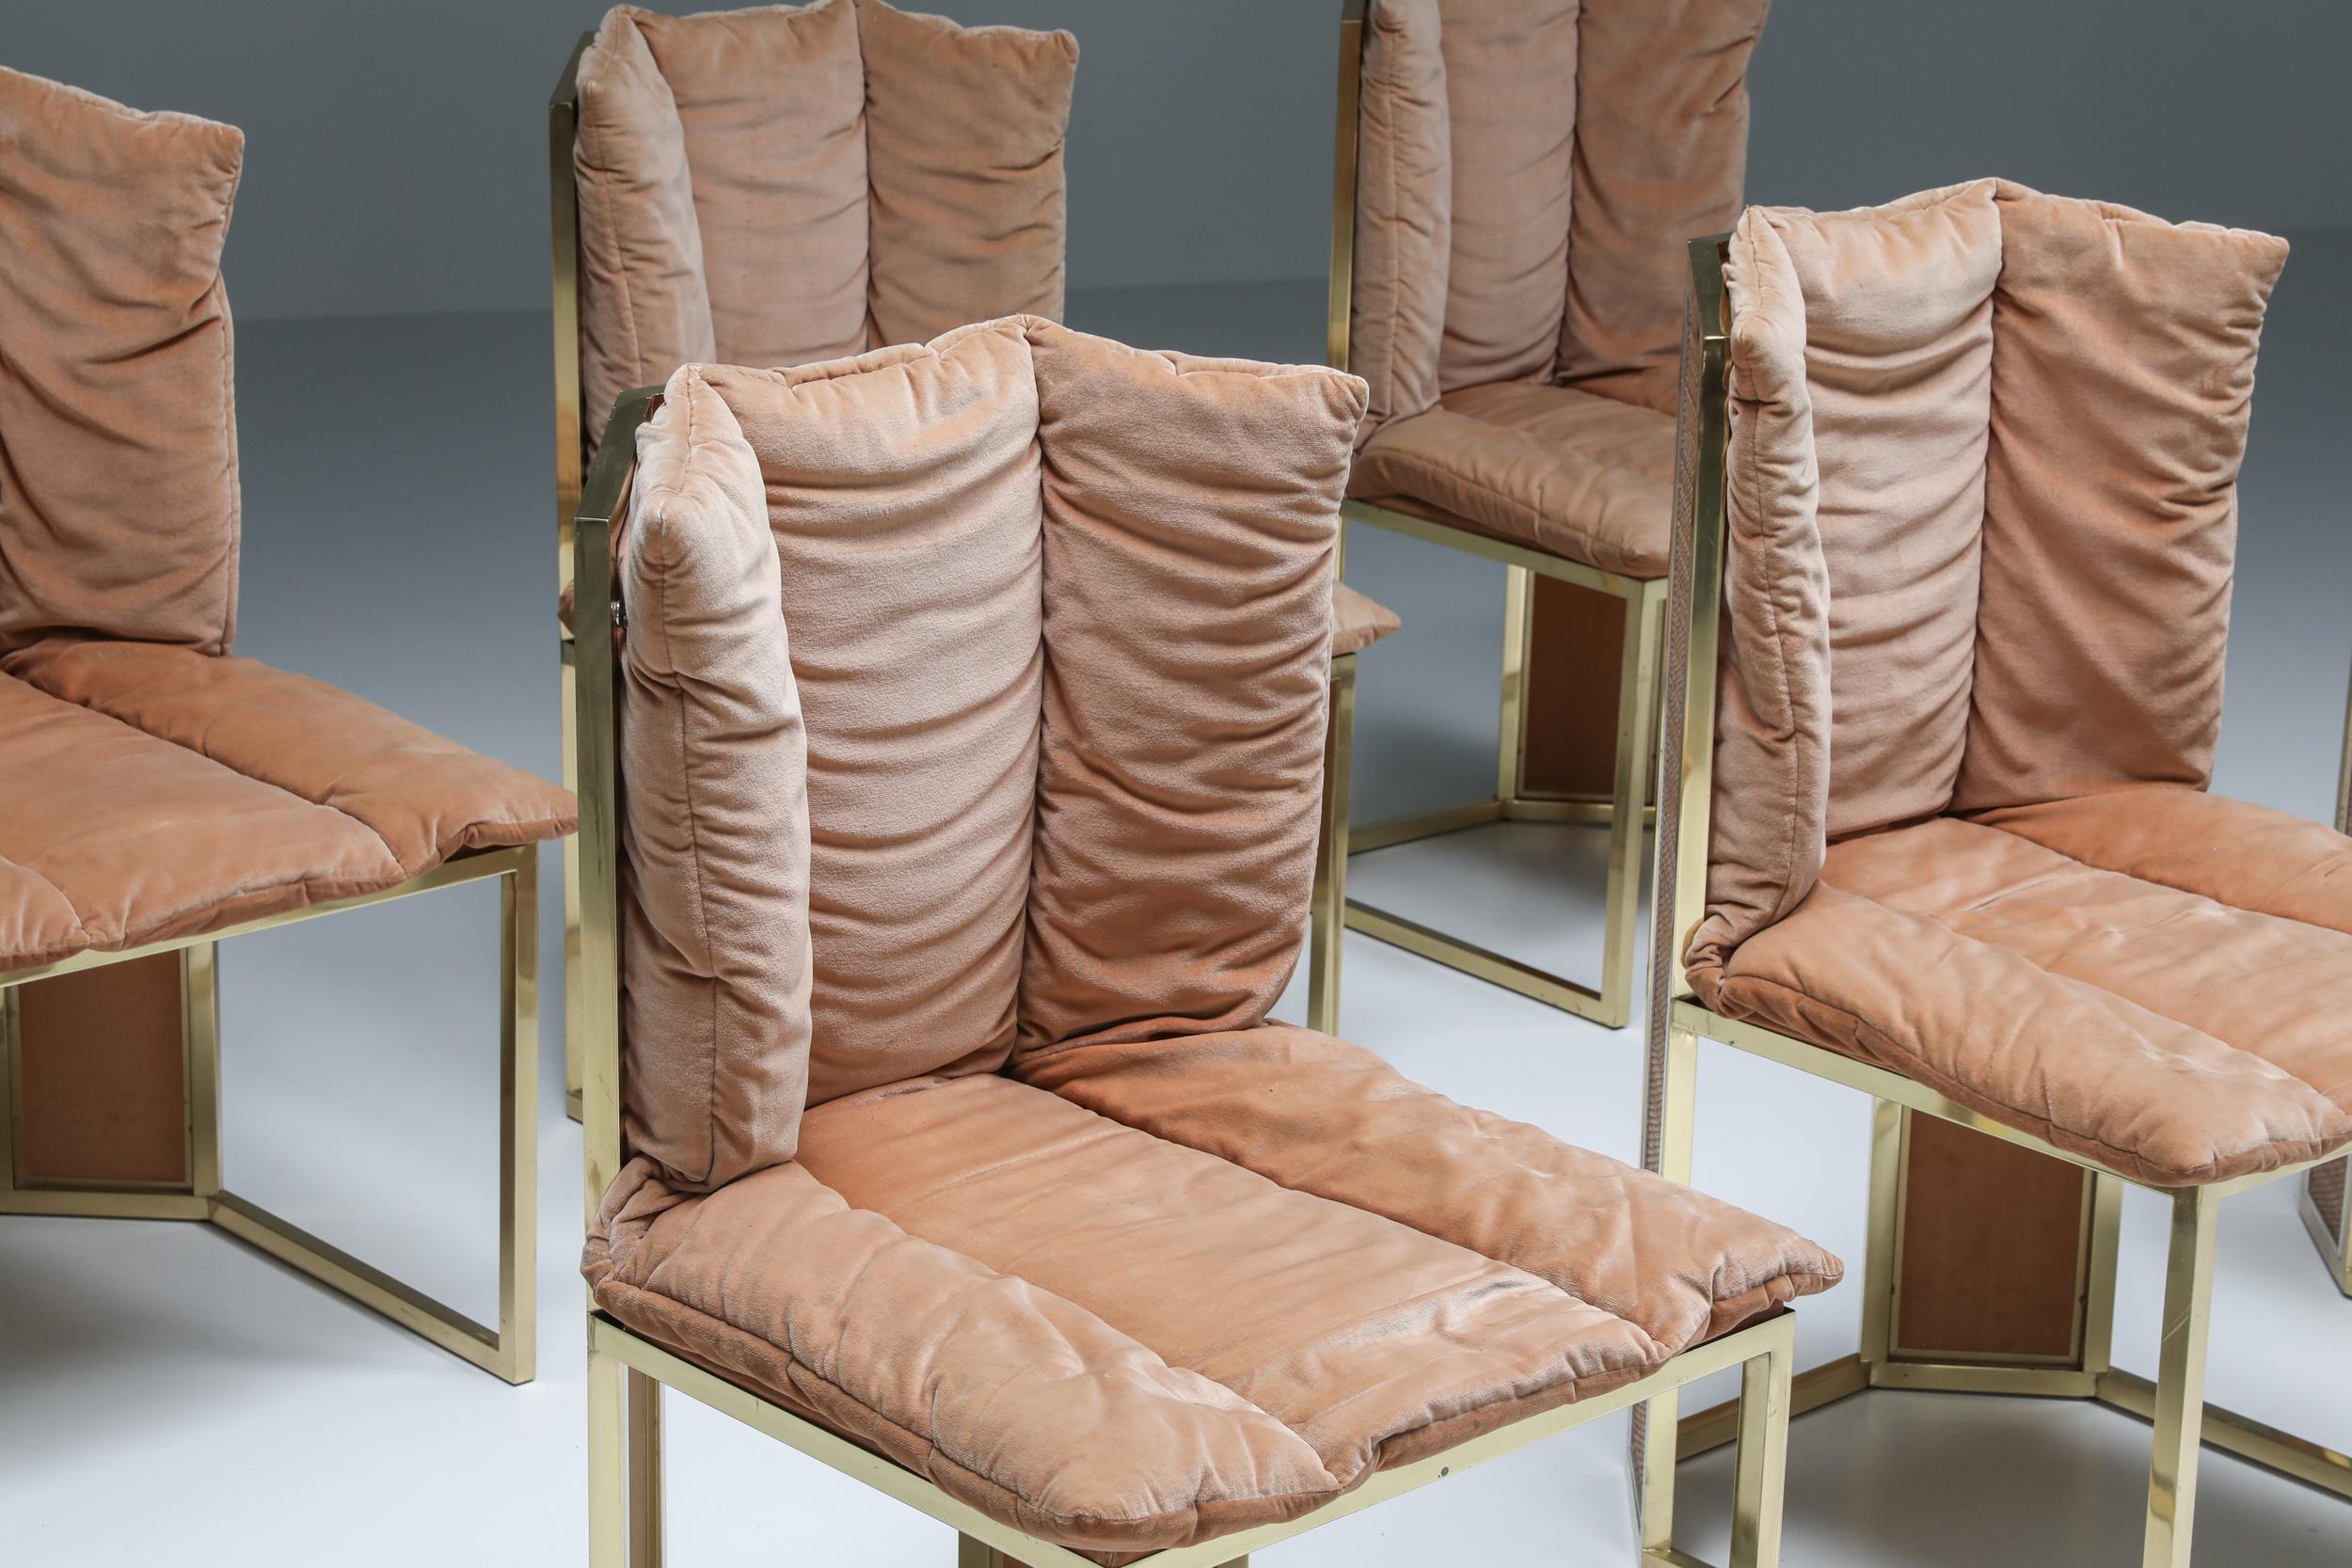 Hollywood Regency; Design Romeo Rega, Italy, 1970; Dimore Studio; Italian design; Maison Jansen; 

Set of six Hollywood Regency brass and pink fabric dining chairs inspired by Maison Jansen and Romeo Rega. Find these chairs in a Dimore Studio’s